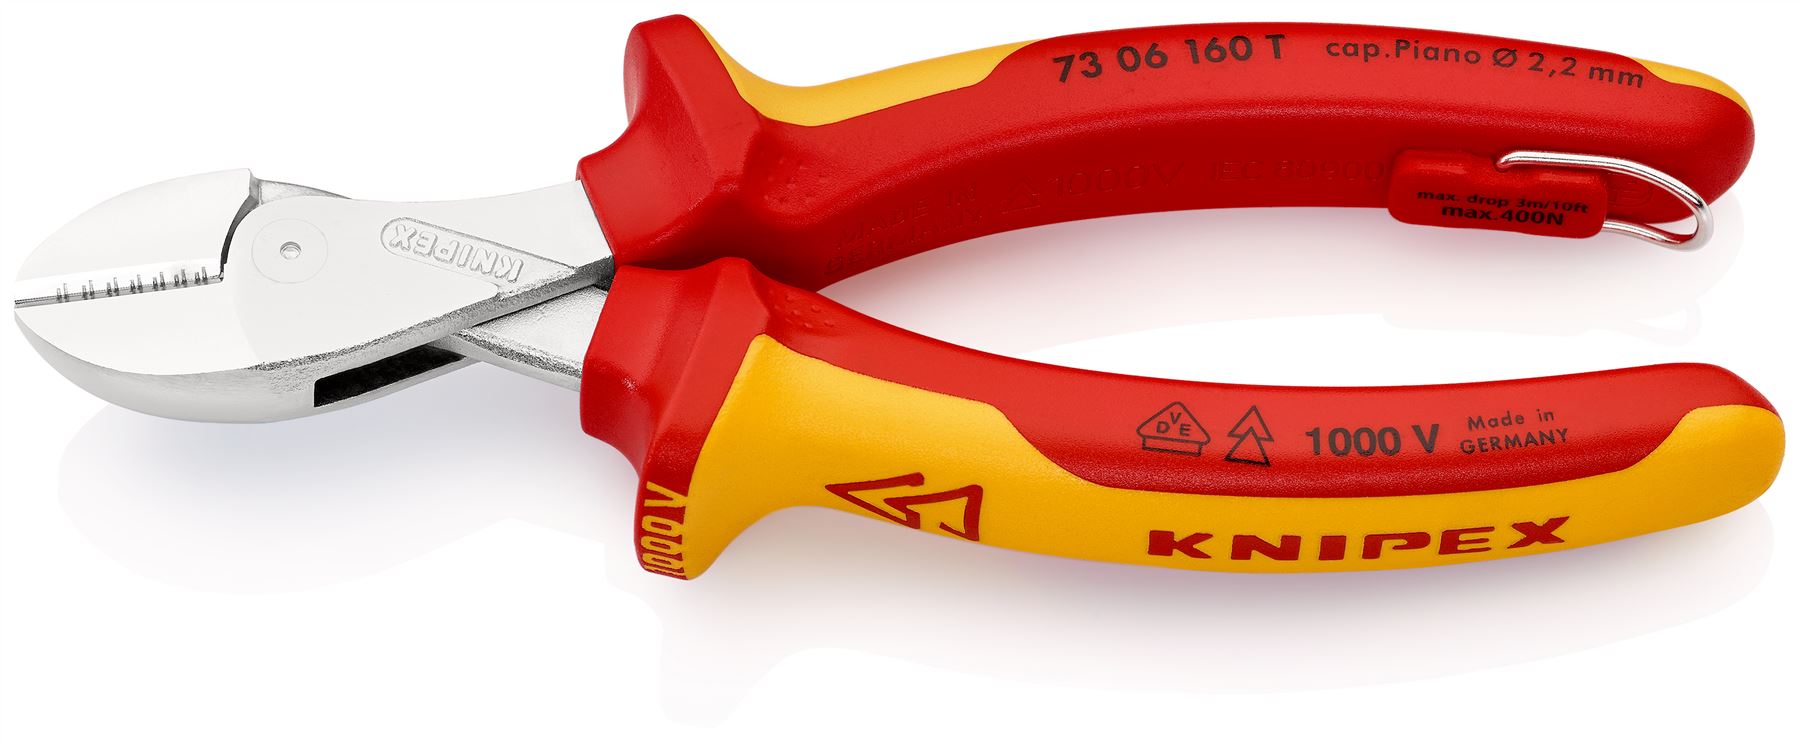 Knipex X-Cut Diagonal Side Cutting Pliers 160mm Tether Point VDE Tested 1000V Chrome Plated 73 06 160 T